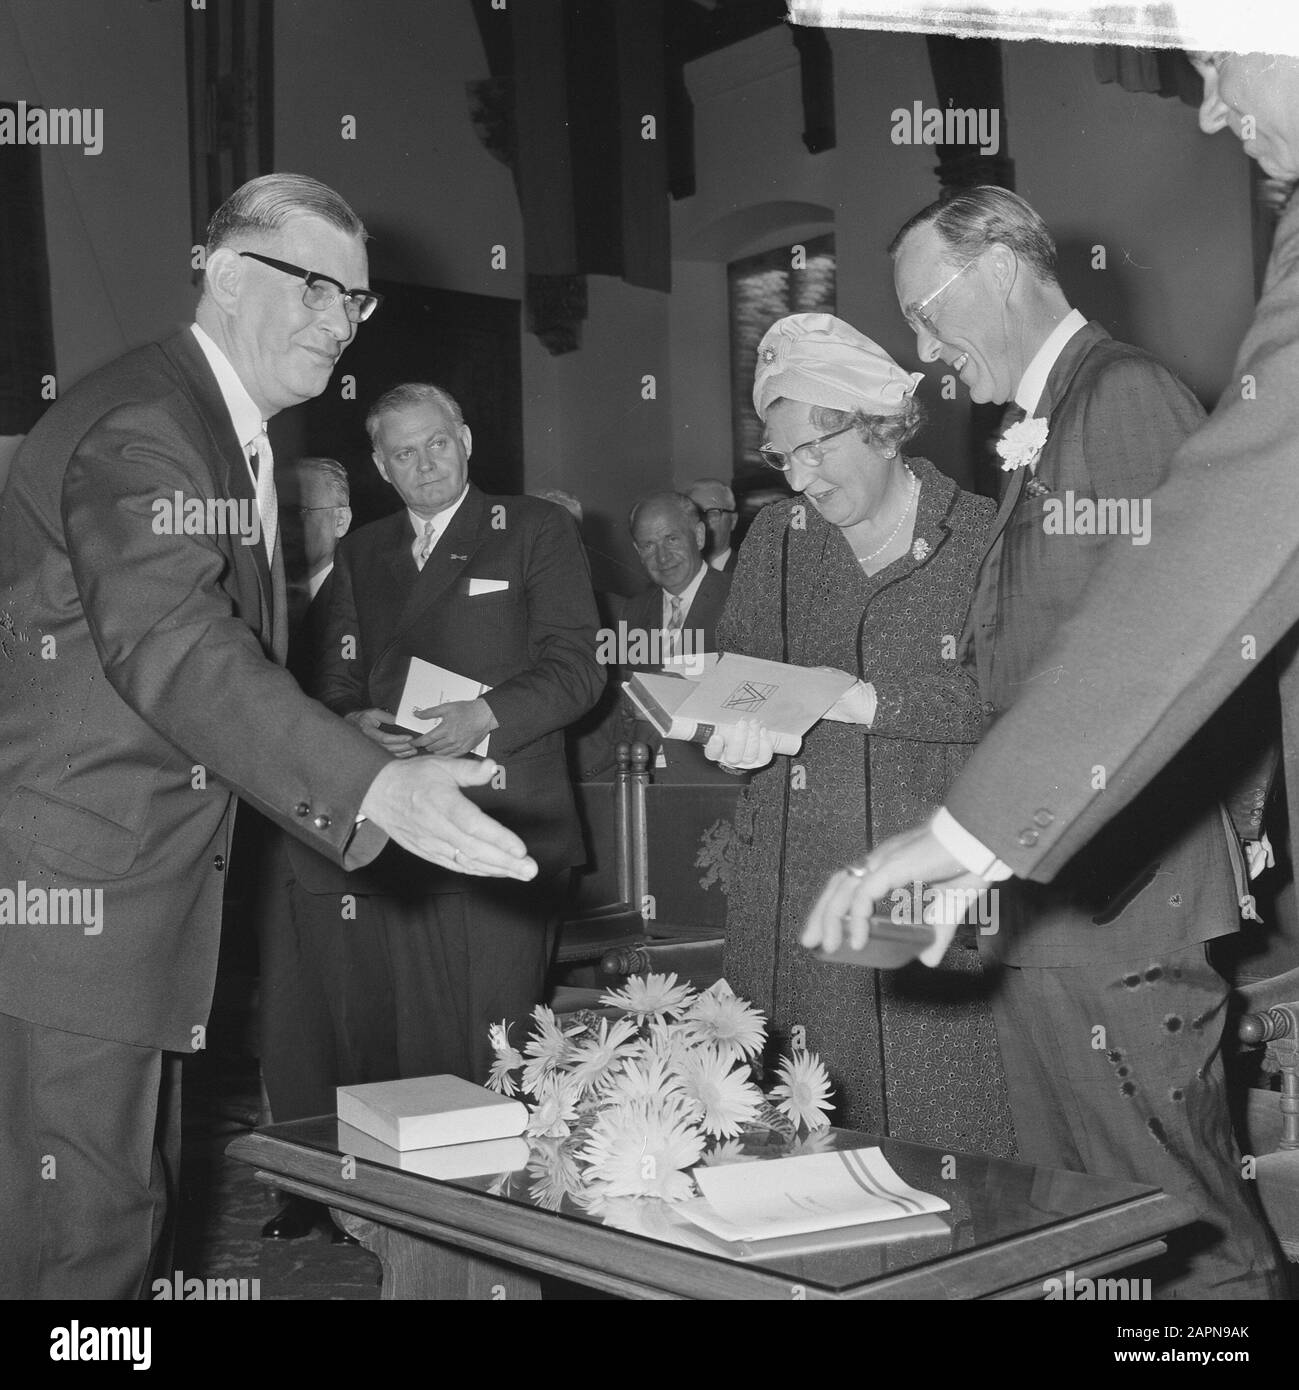 Freedom slustrum ex-political prisoners in The Hague  Queen Juliana receives a book and prince Bernhard a special badge Date: 23 June 1965 Location: The Hague, Zuid-Holland Keywords: books, queens, tokens, princes Personal name: Bernhard (prince Netherlands), Juliana (queen Netherlands) Stock Photo